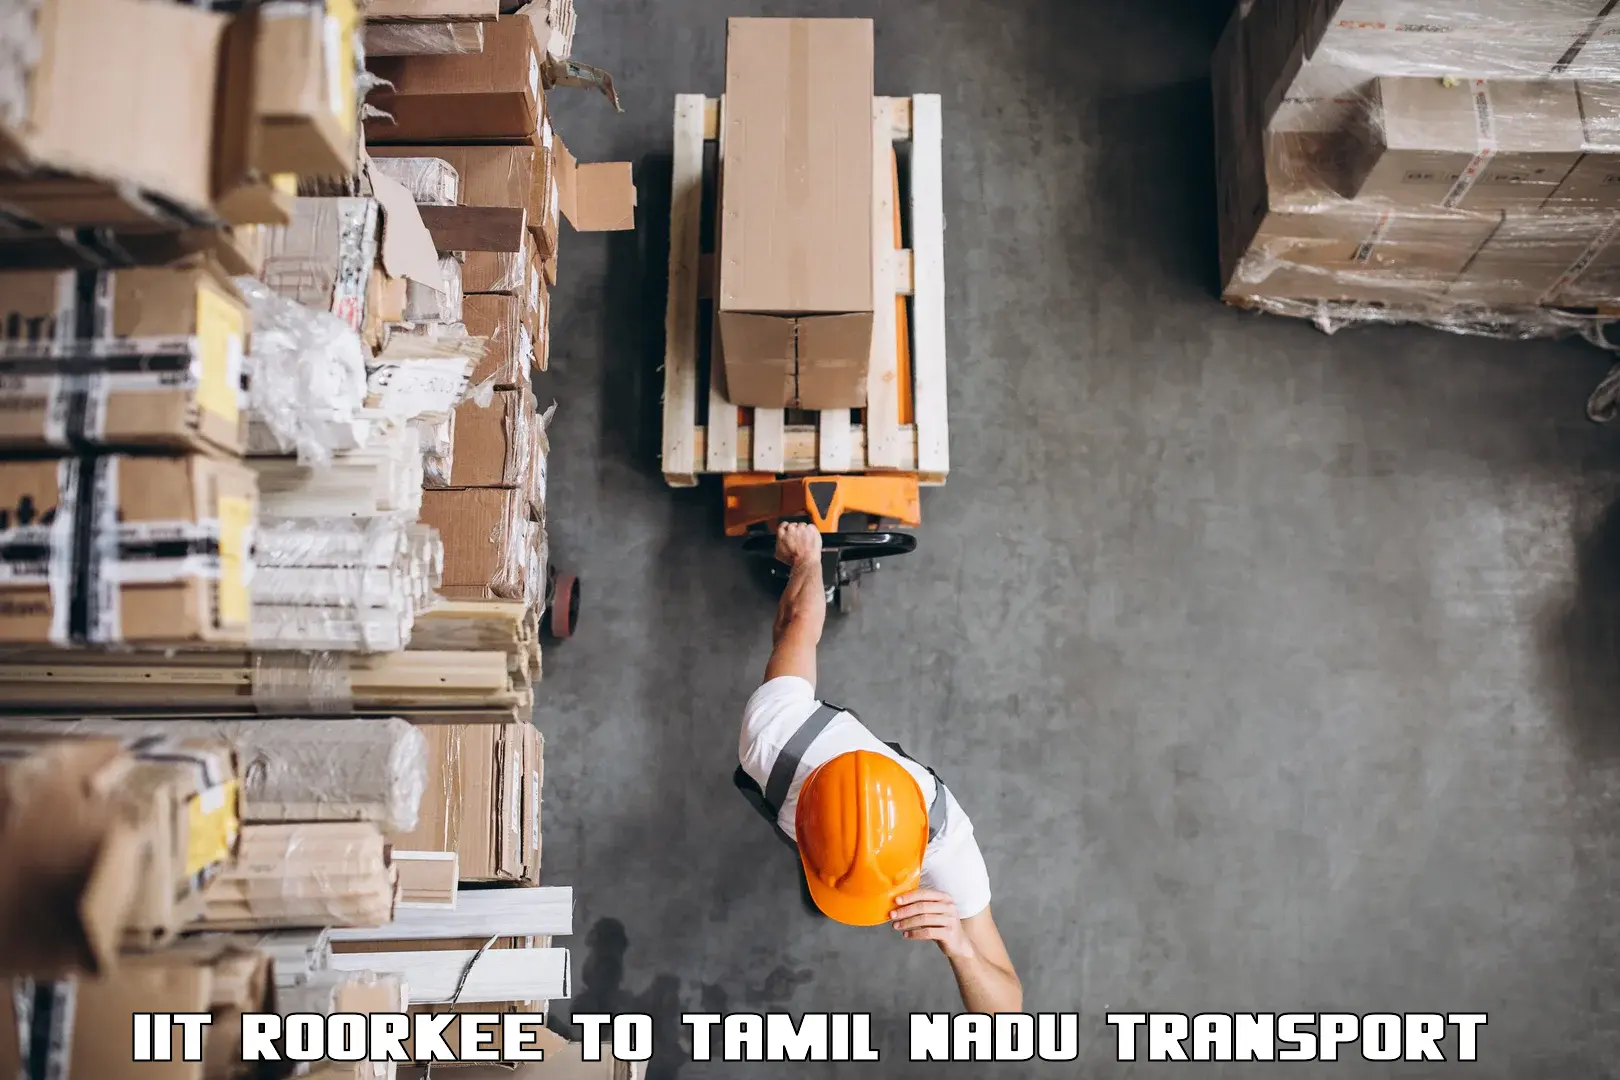 Daily parcel service transport IIT Roorkee to Anna University Chennai